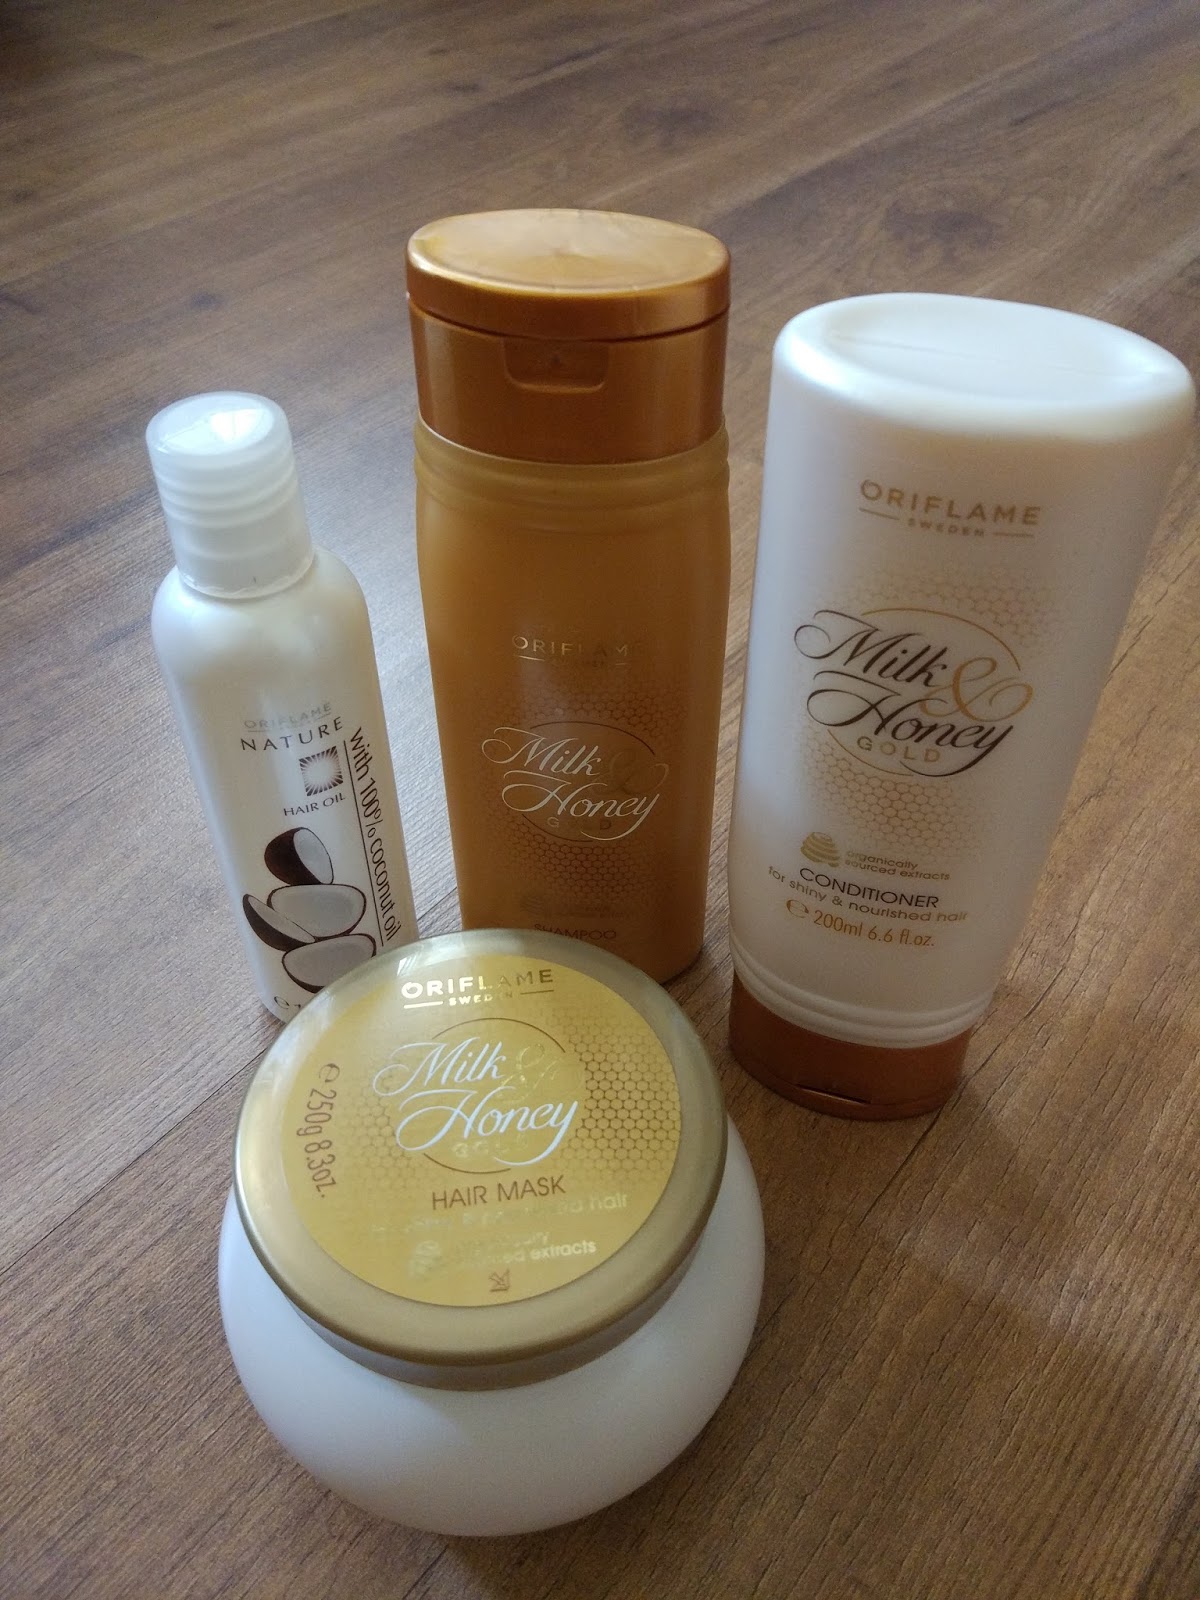 My Hair Care Regime With Oriflame Milk and Honey Gold Range